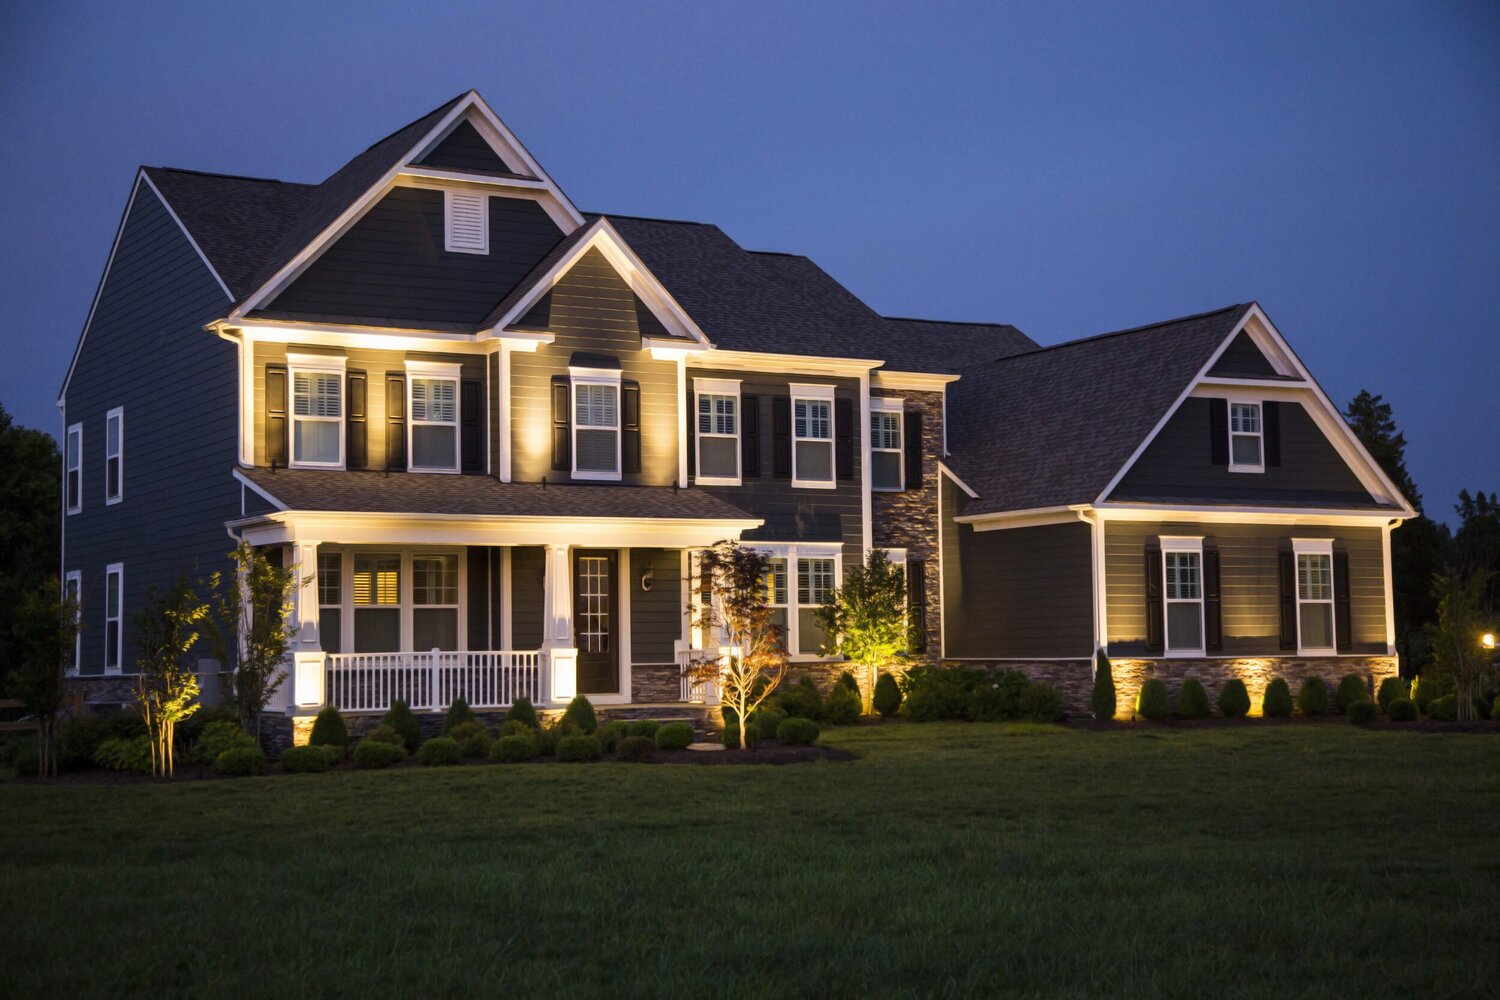 House With Curb Appeal Lighting